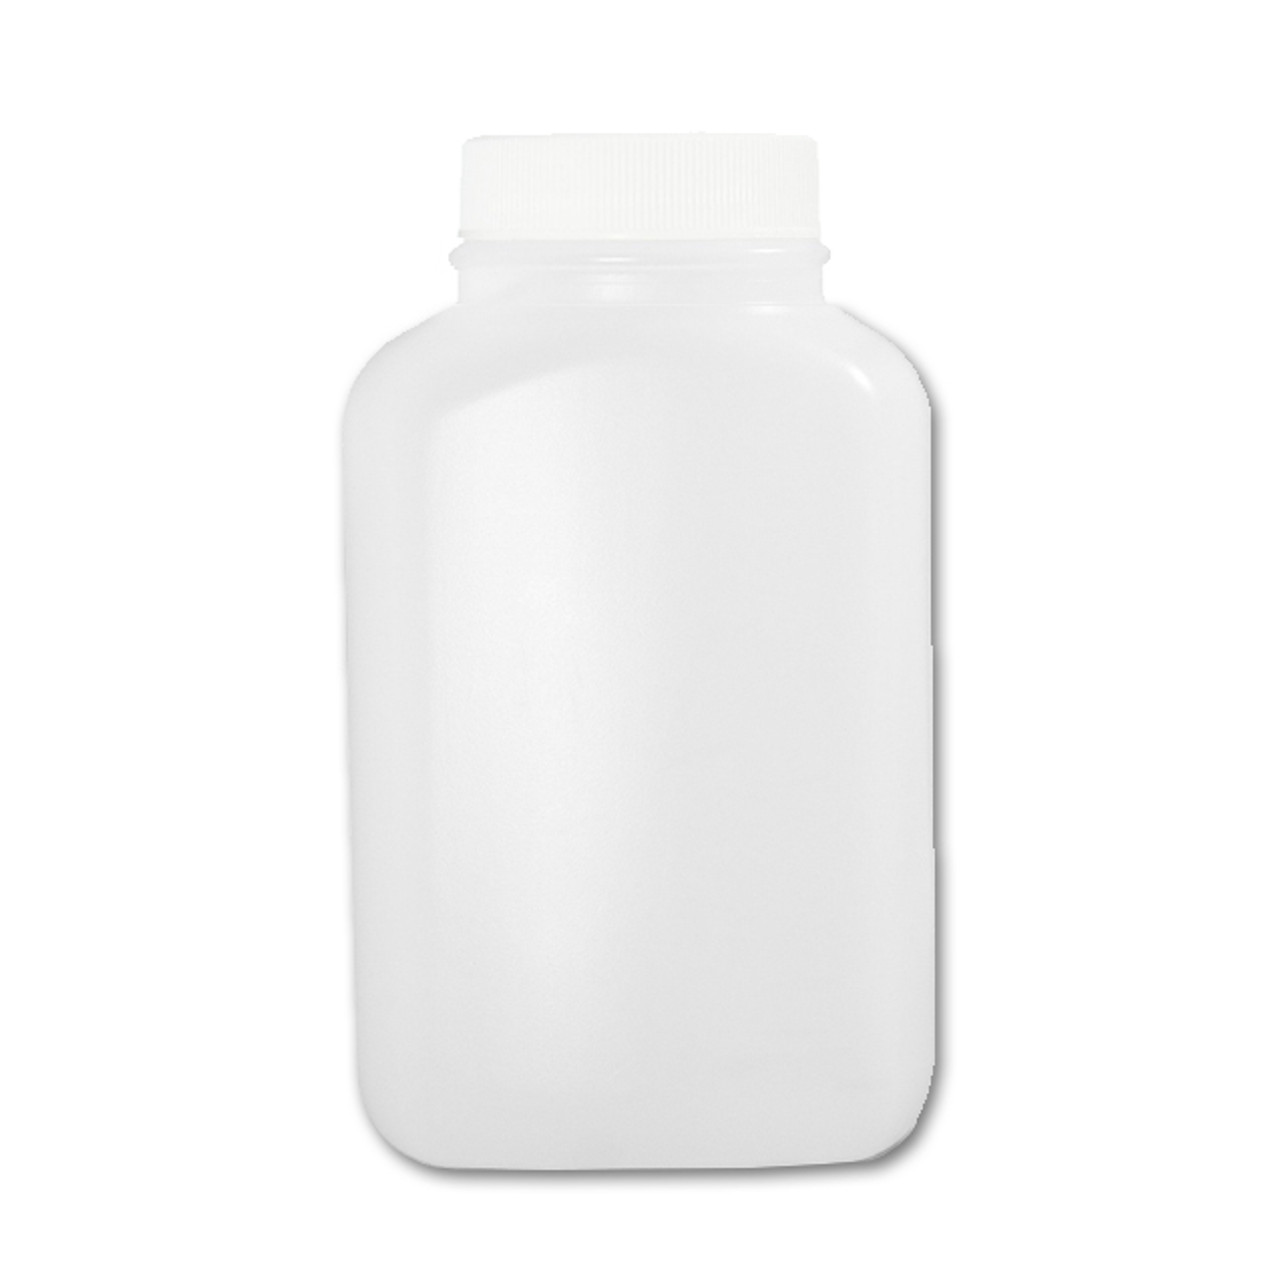 Product: Environmental Express Wide-Mouth Clear Glass Bottle, Level 3, 10 L  from Environmental Express